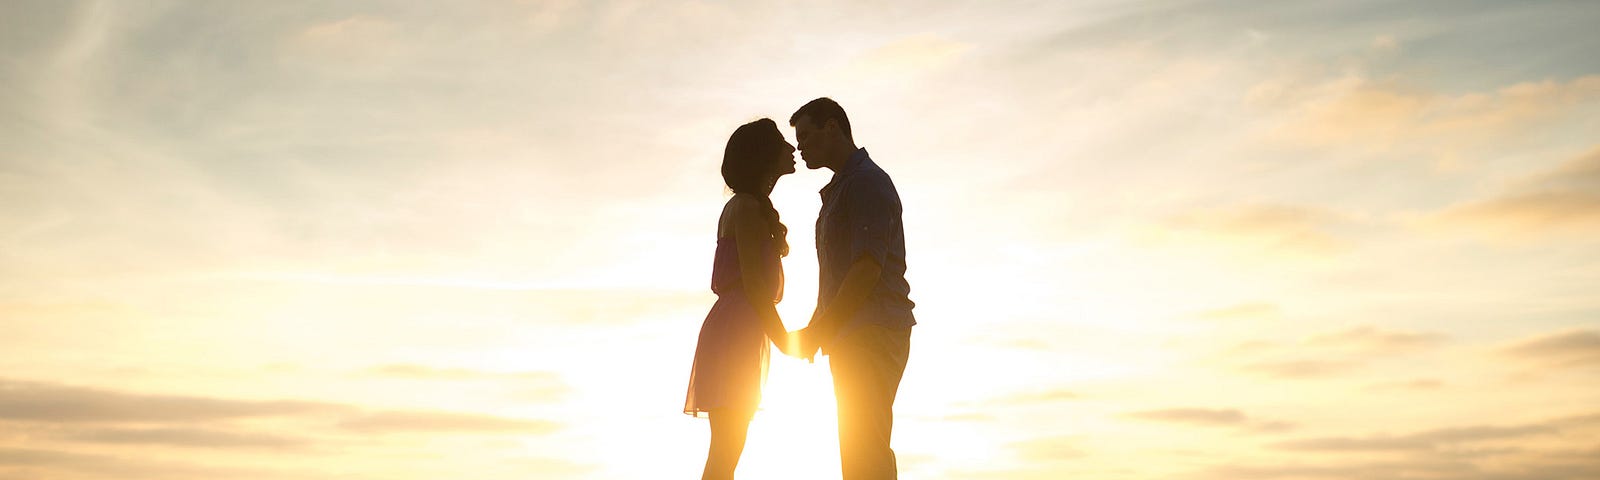 Couple standing on hill about to kiss with sunset in background